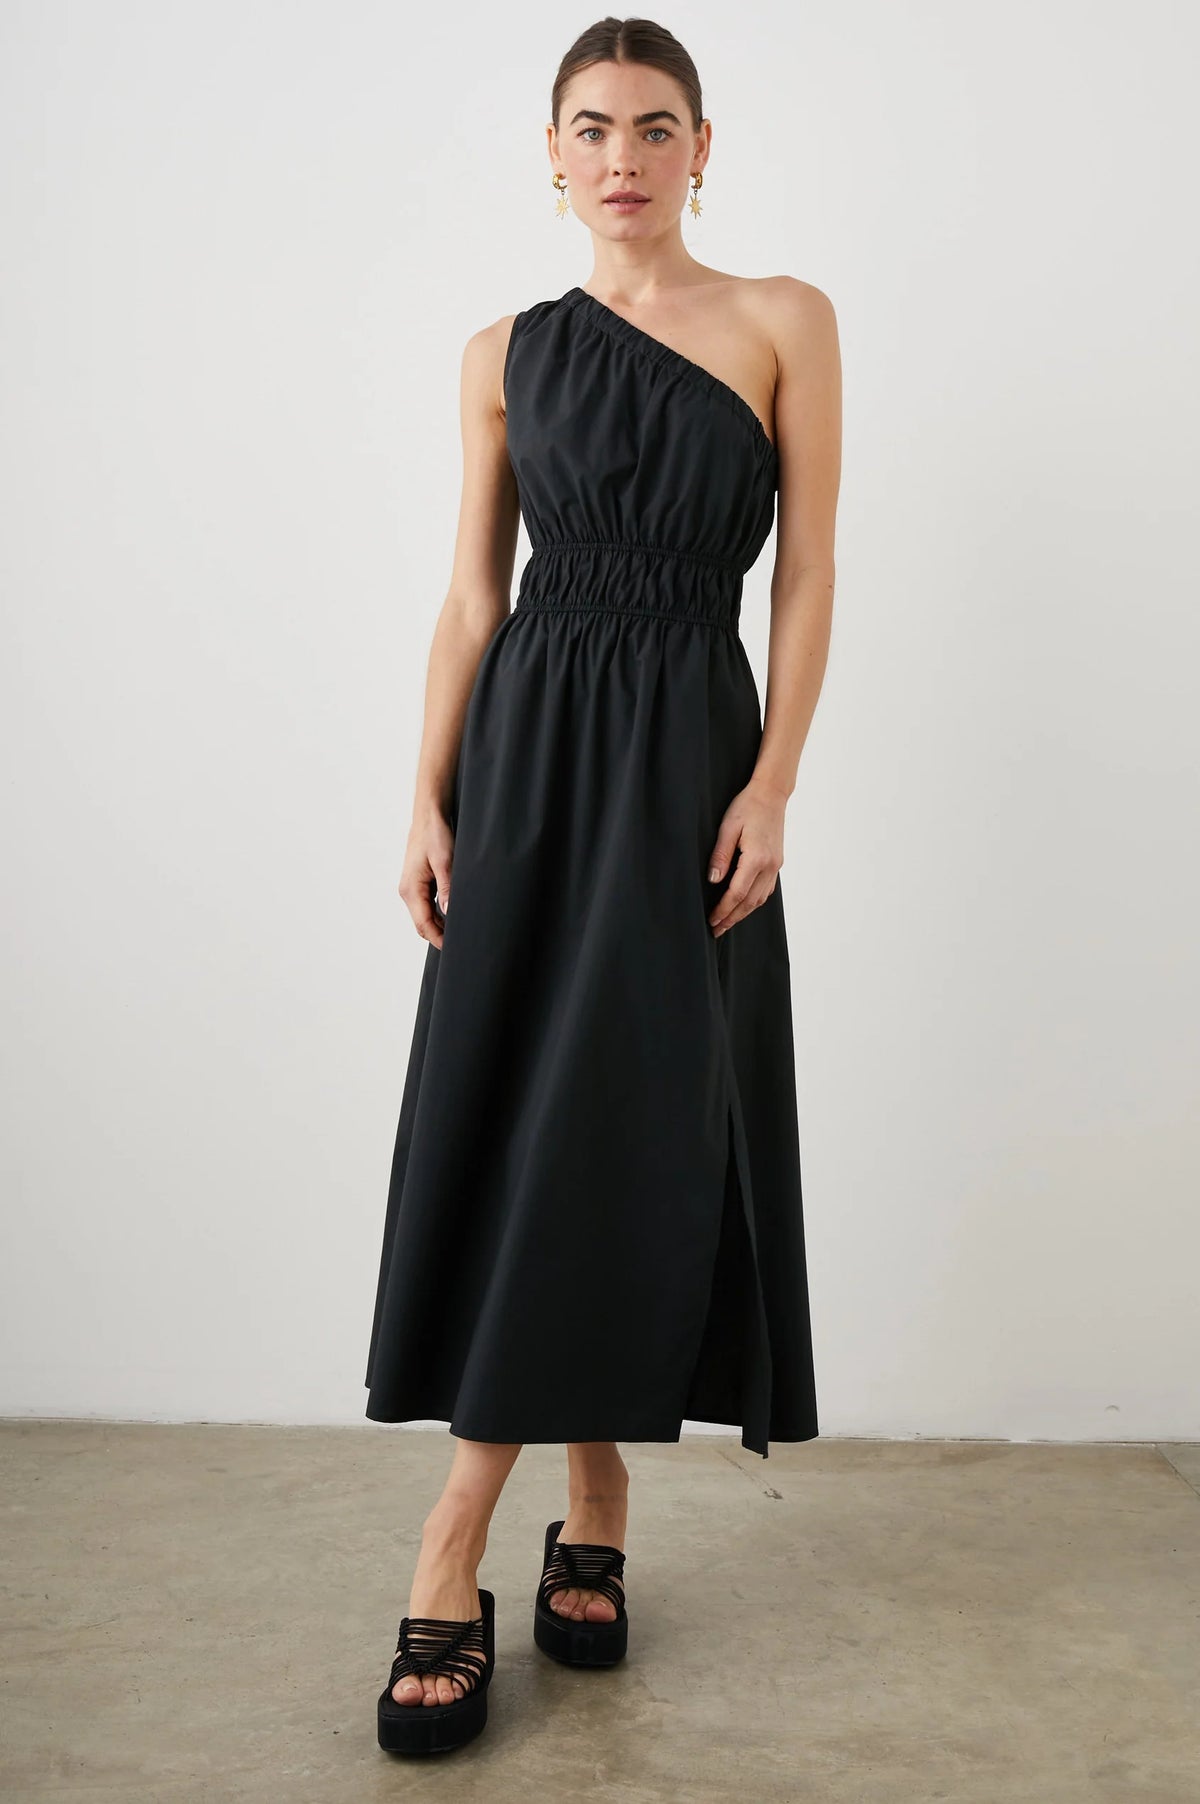 One shoulder black dress with side split and double elasticated waistband